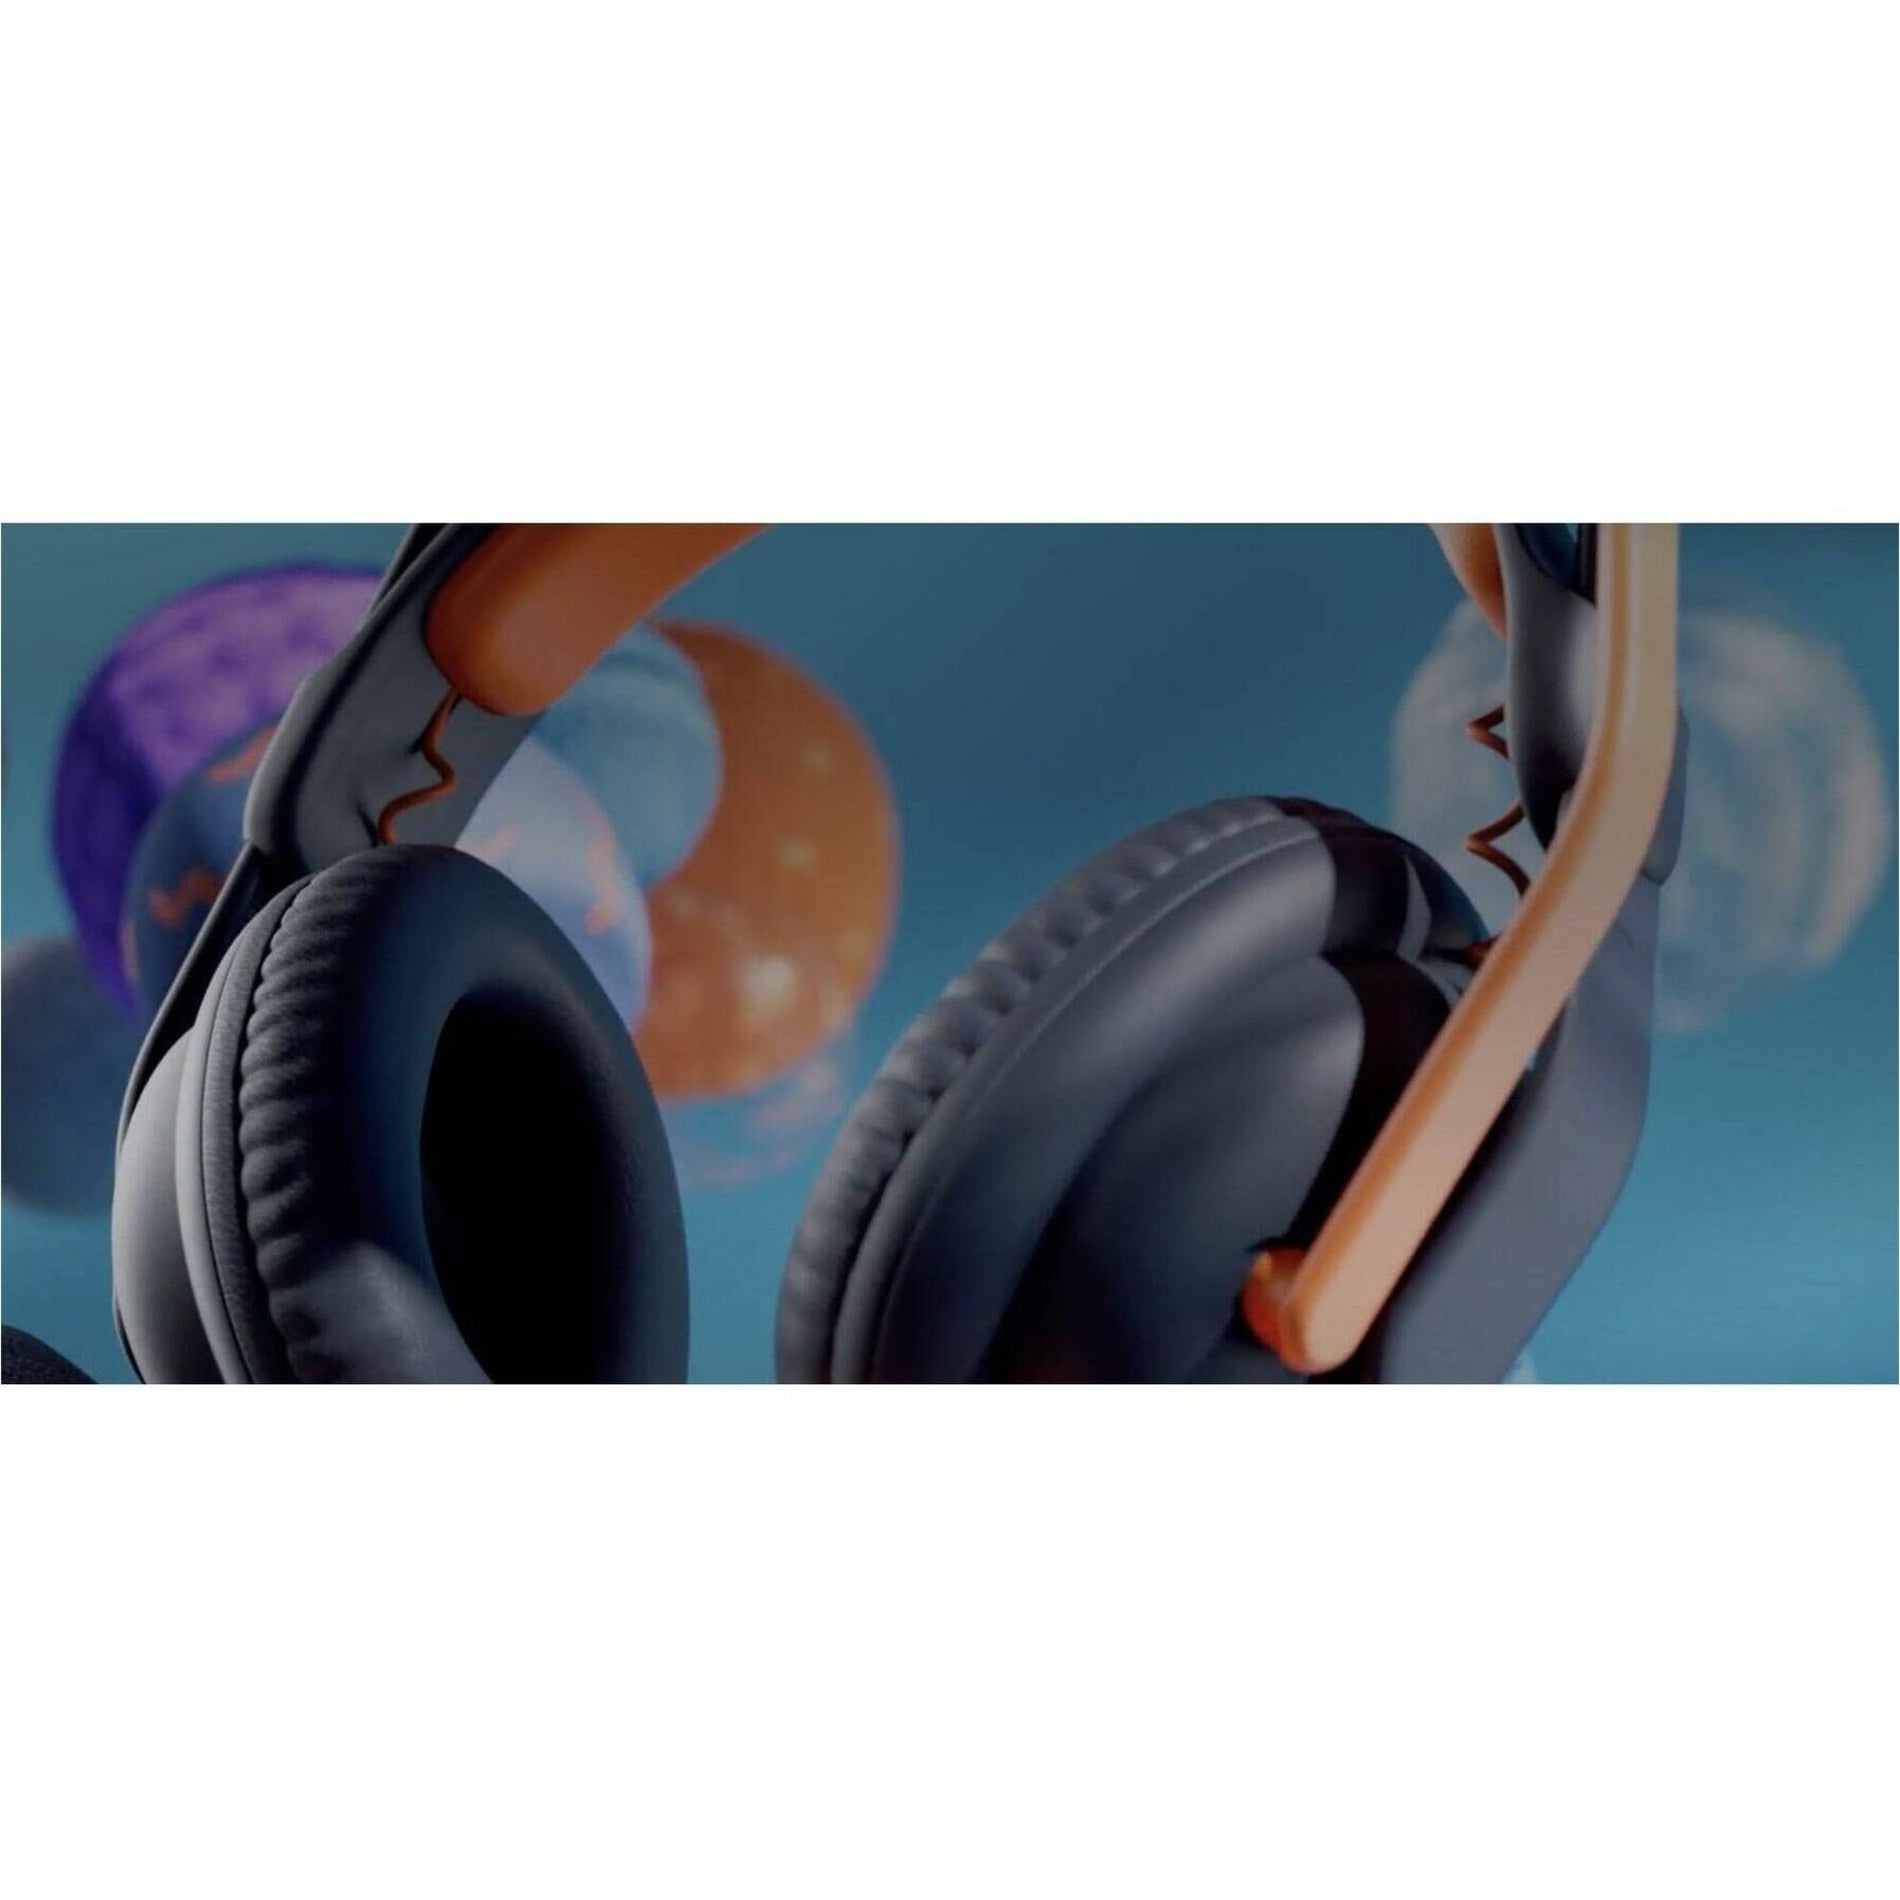 Logitech 981-001395 Zone Learn Wired Headsets for Learners, Rotating Microphone, Plug and Play, Noise Isolation